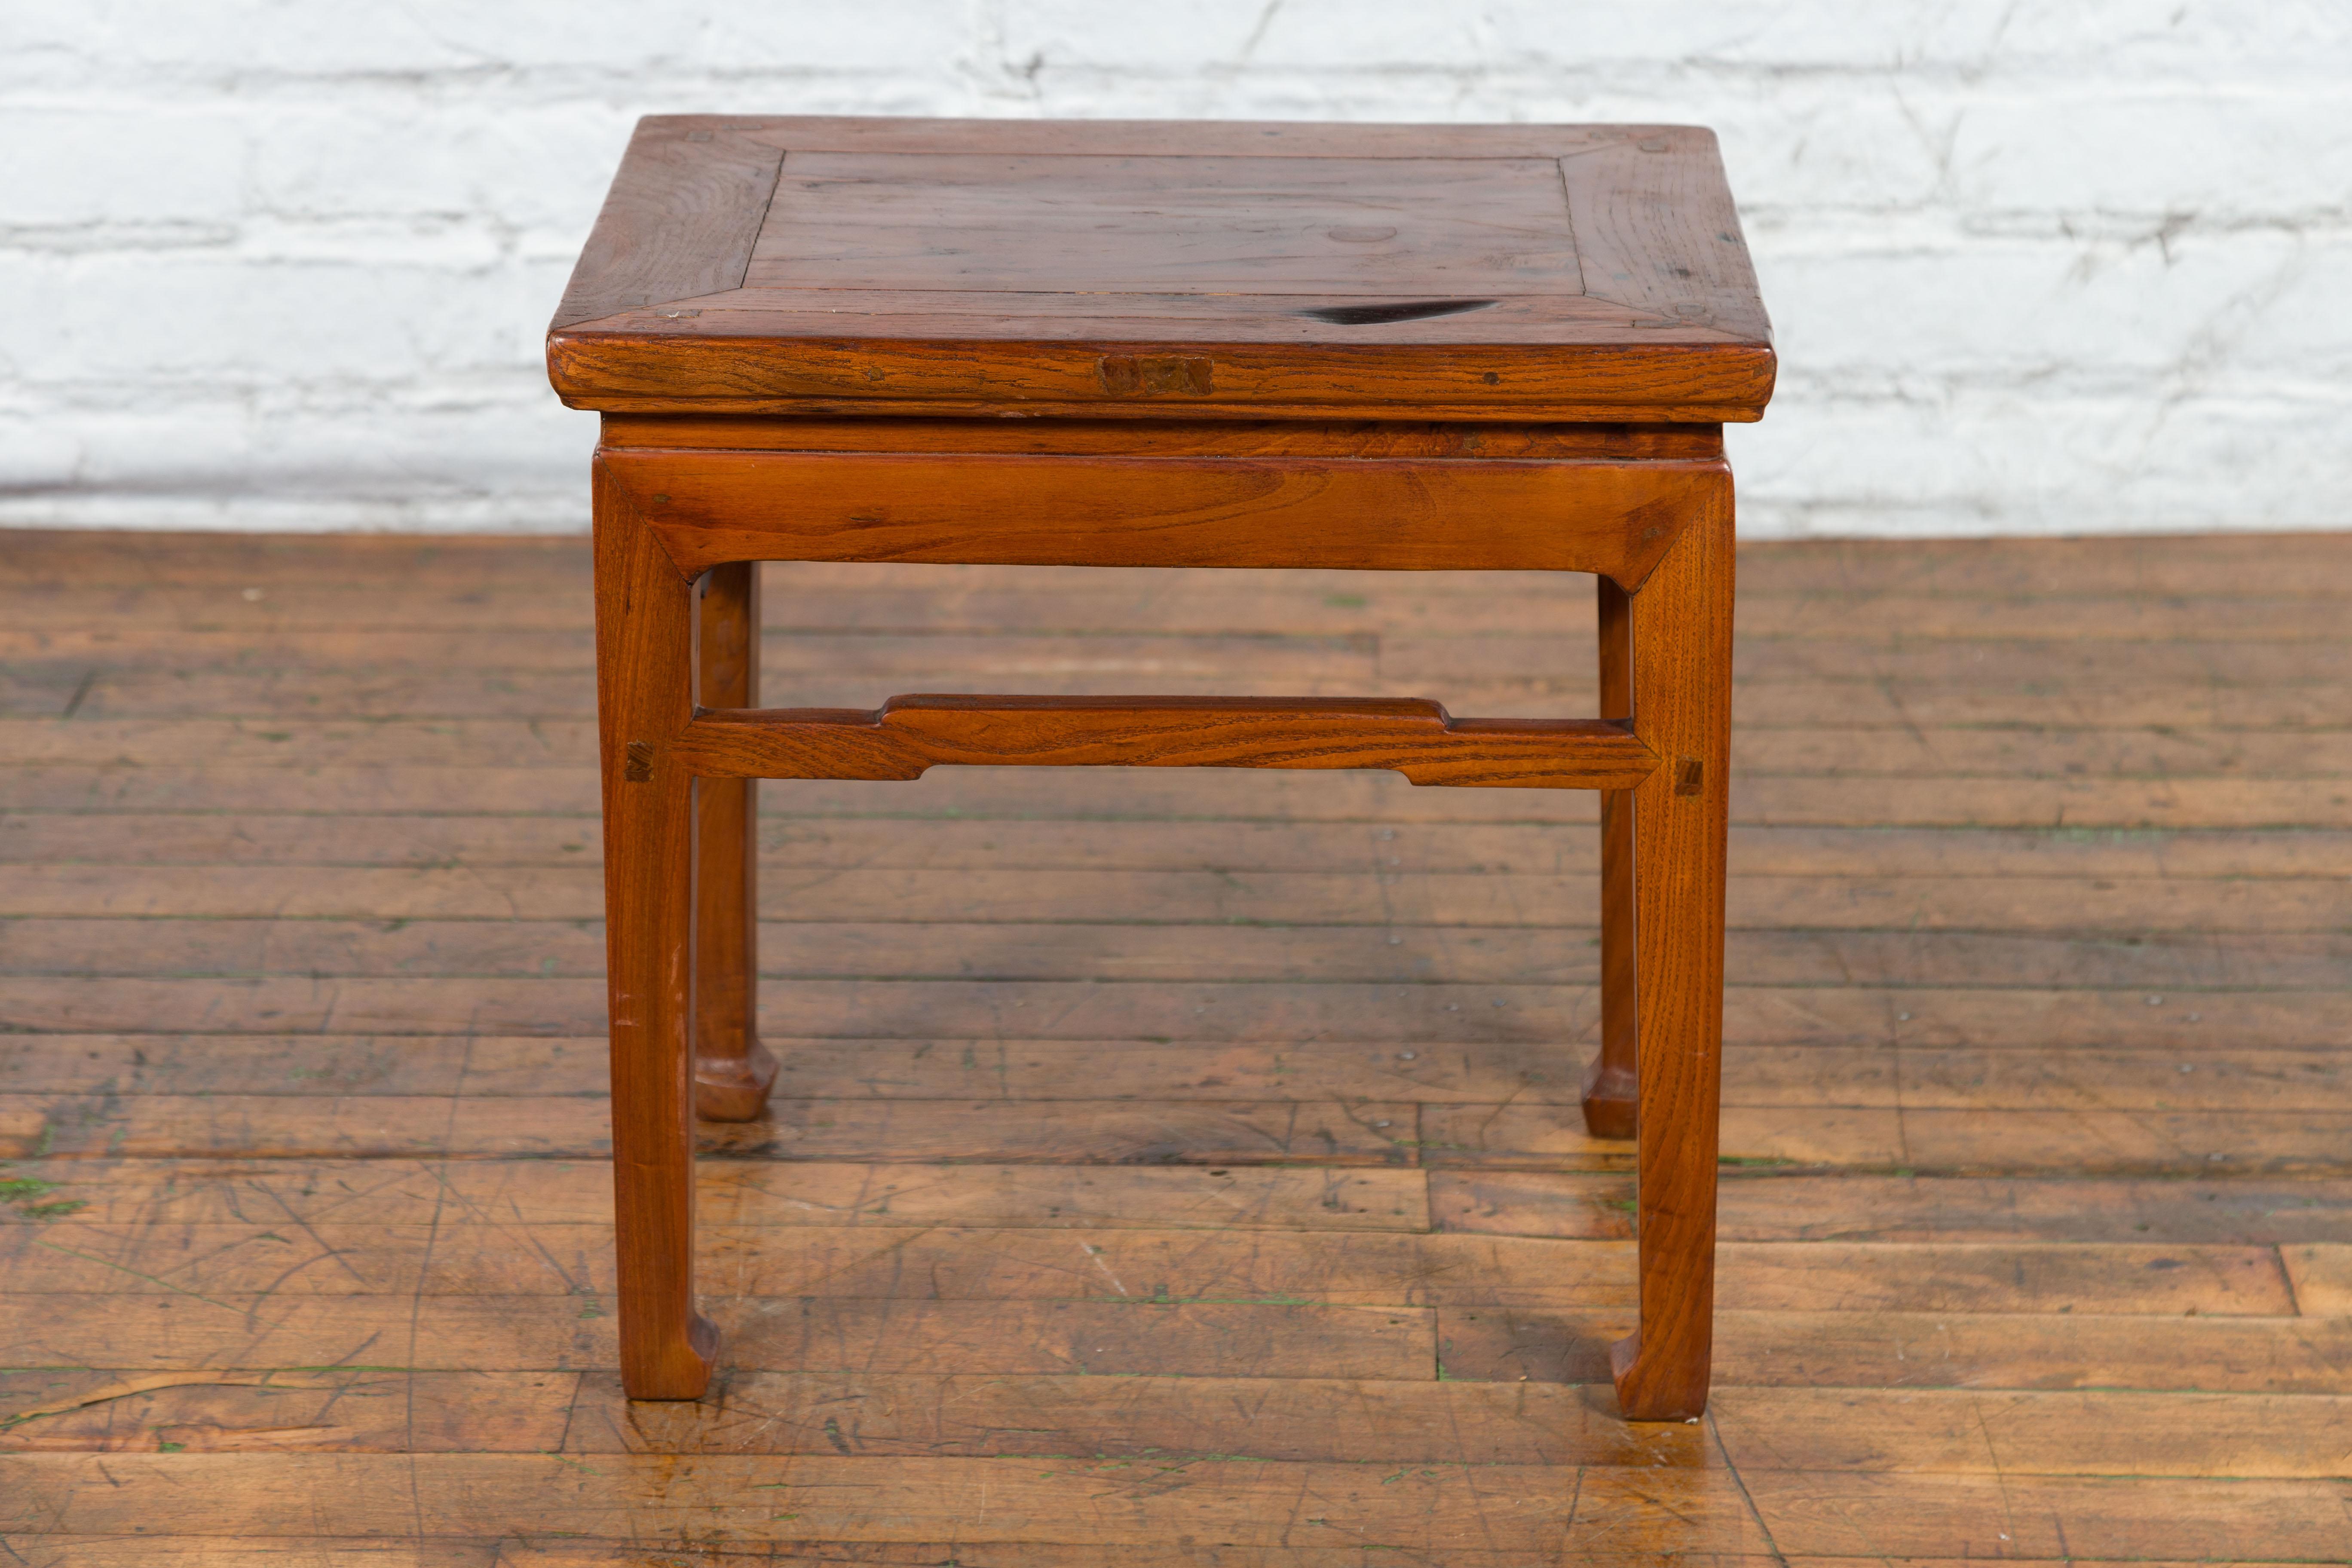 Chinese Qing Dynasty 19th Century Side Table with Humpback Stretchers For Sale 8